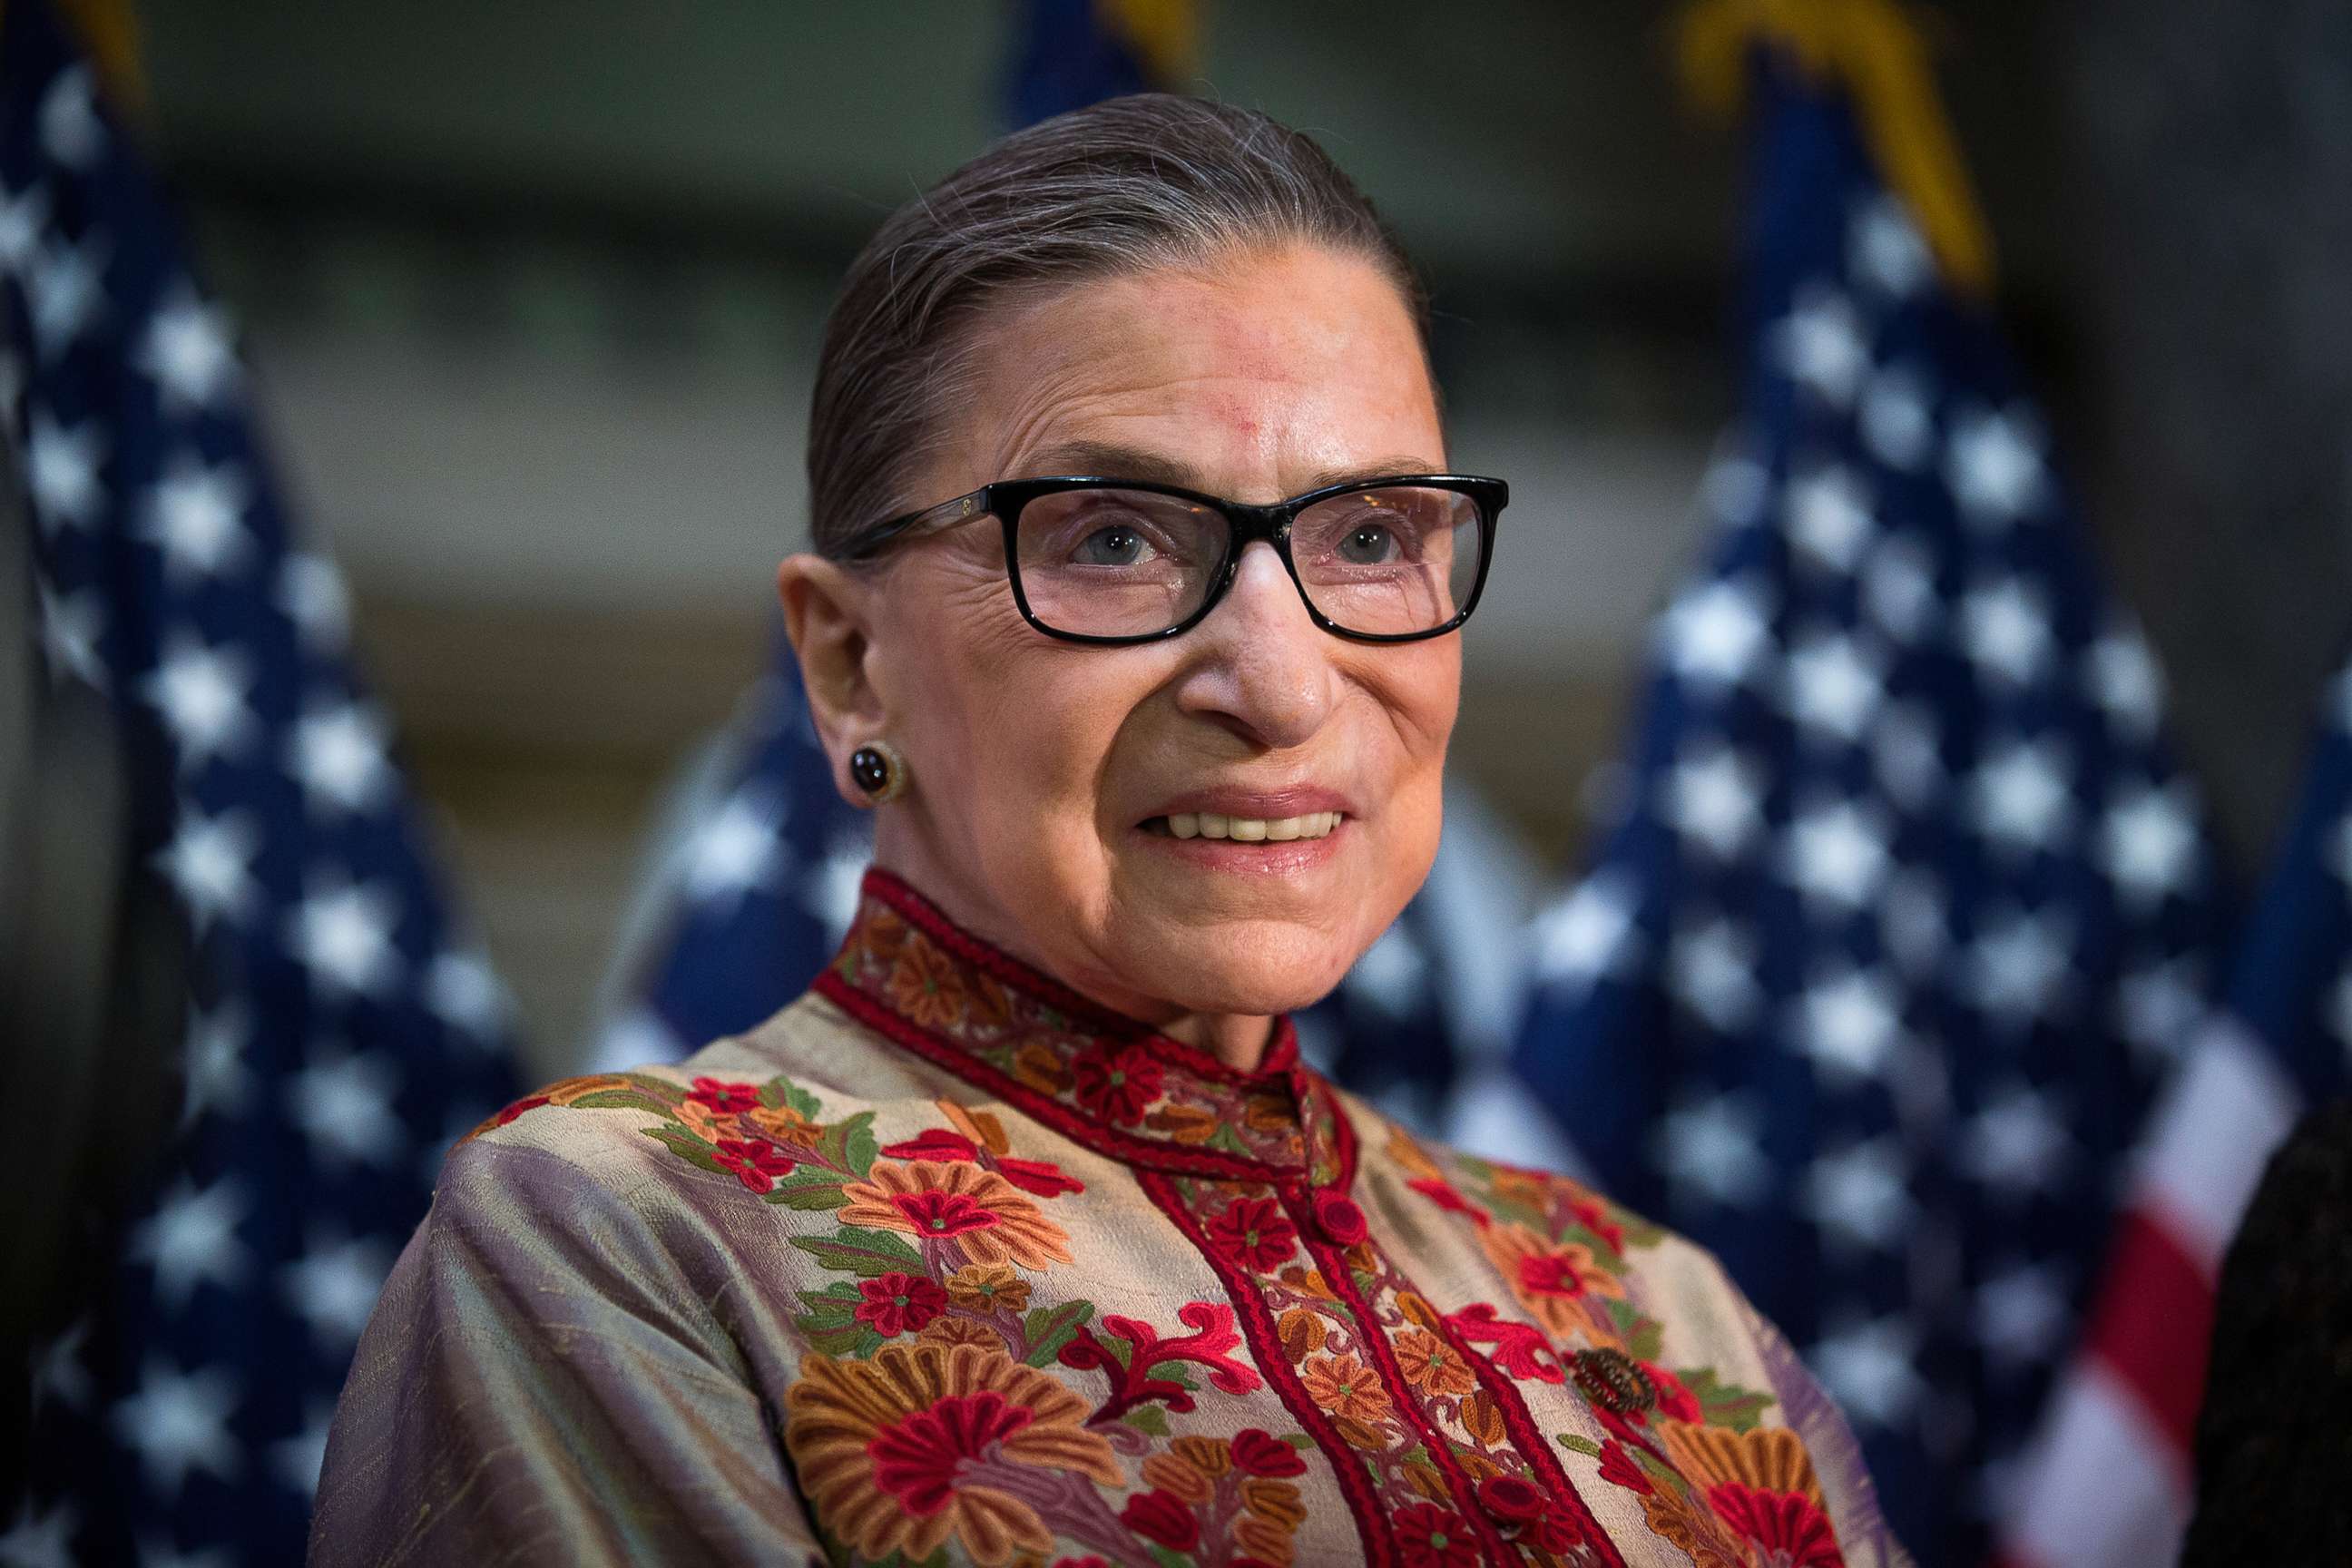 PHOTO: Justice Ruth Bader Ginsburg poses for a portrait on Capitol Hill in Washington, March 18, 2015.